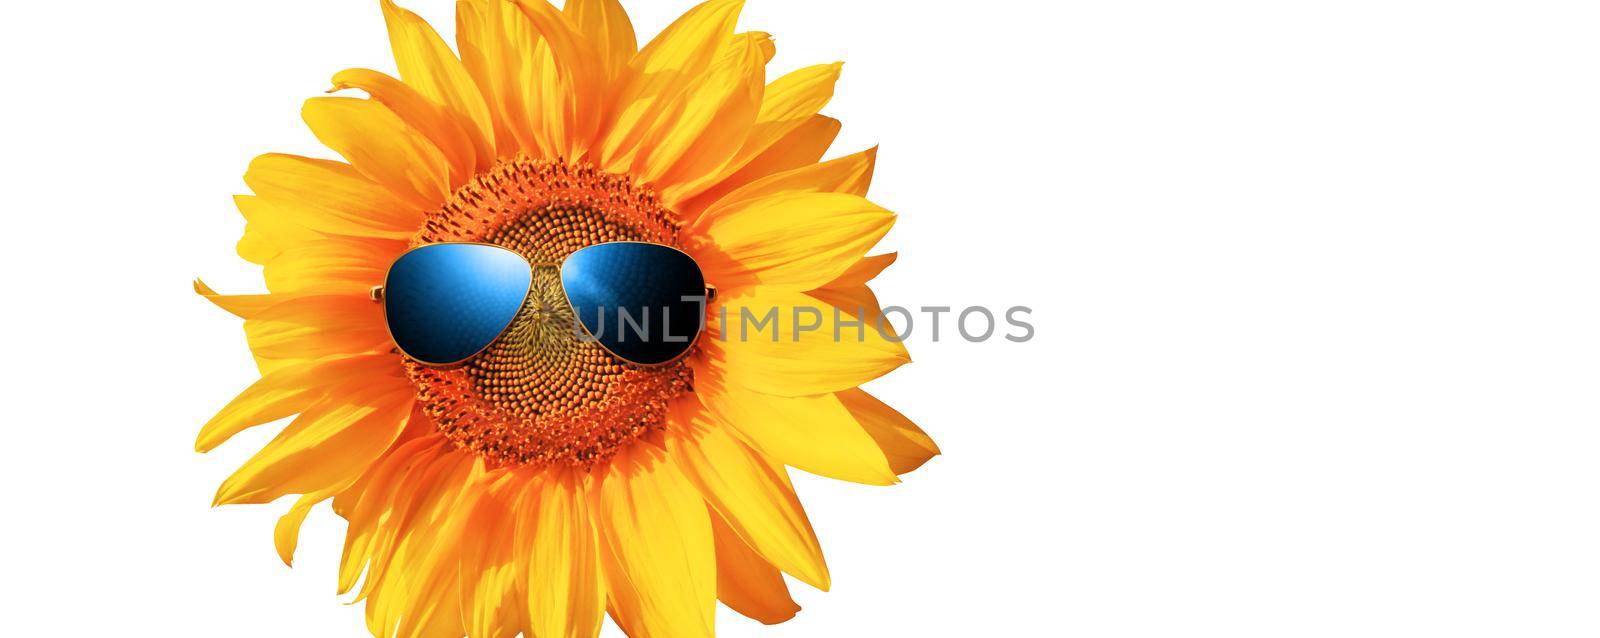 Funny sunflower with sunglasses on a white background by Taut